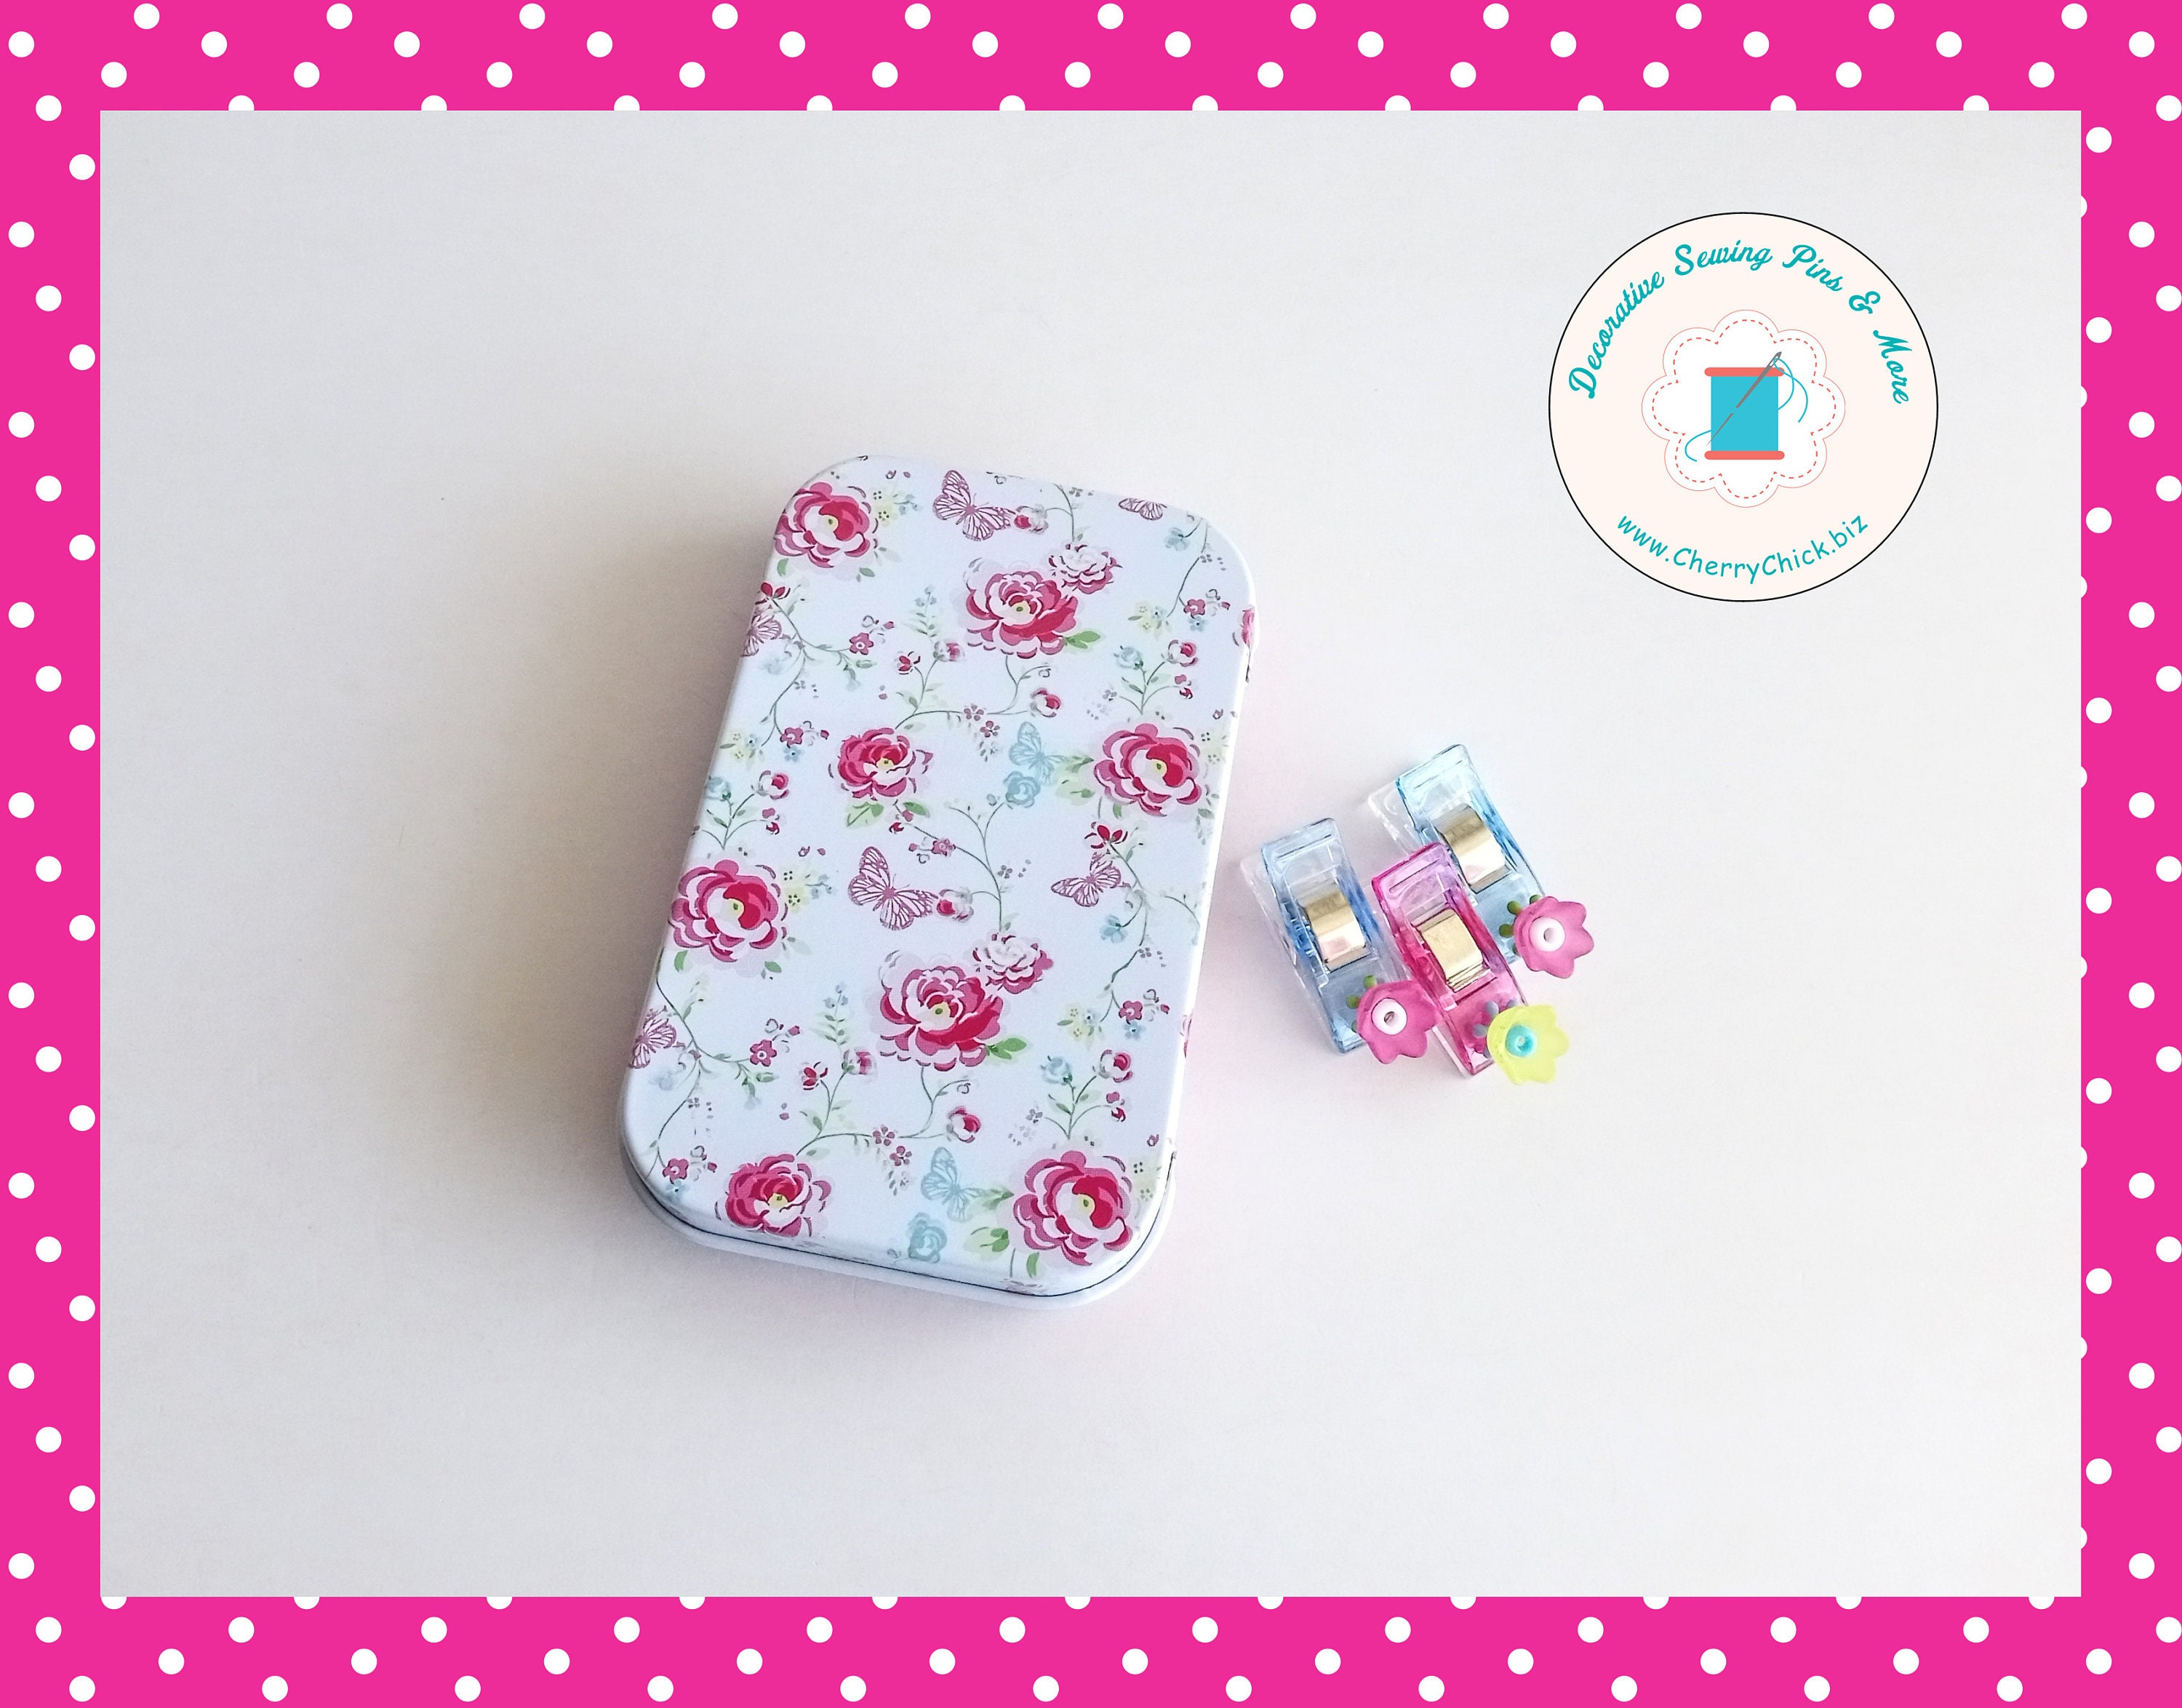 Quilting Clips Sewing Clips Fabric Clips Sewing Gifts Binding Clips Clips  in Tins Gift for Quilters Quilt Retreat Gift 